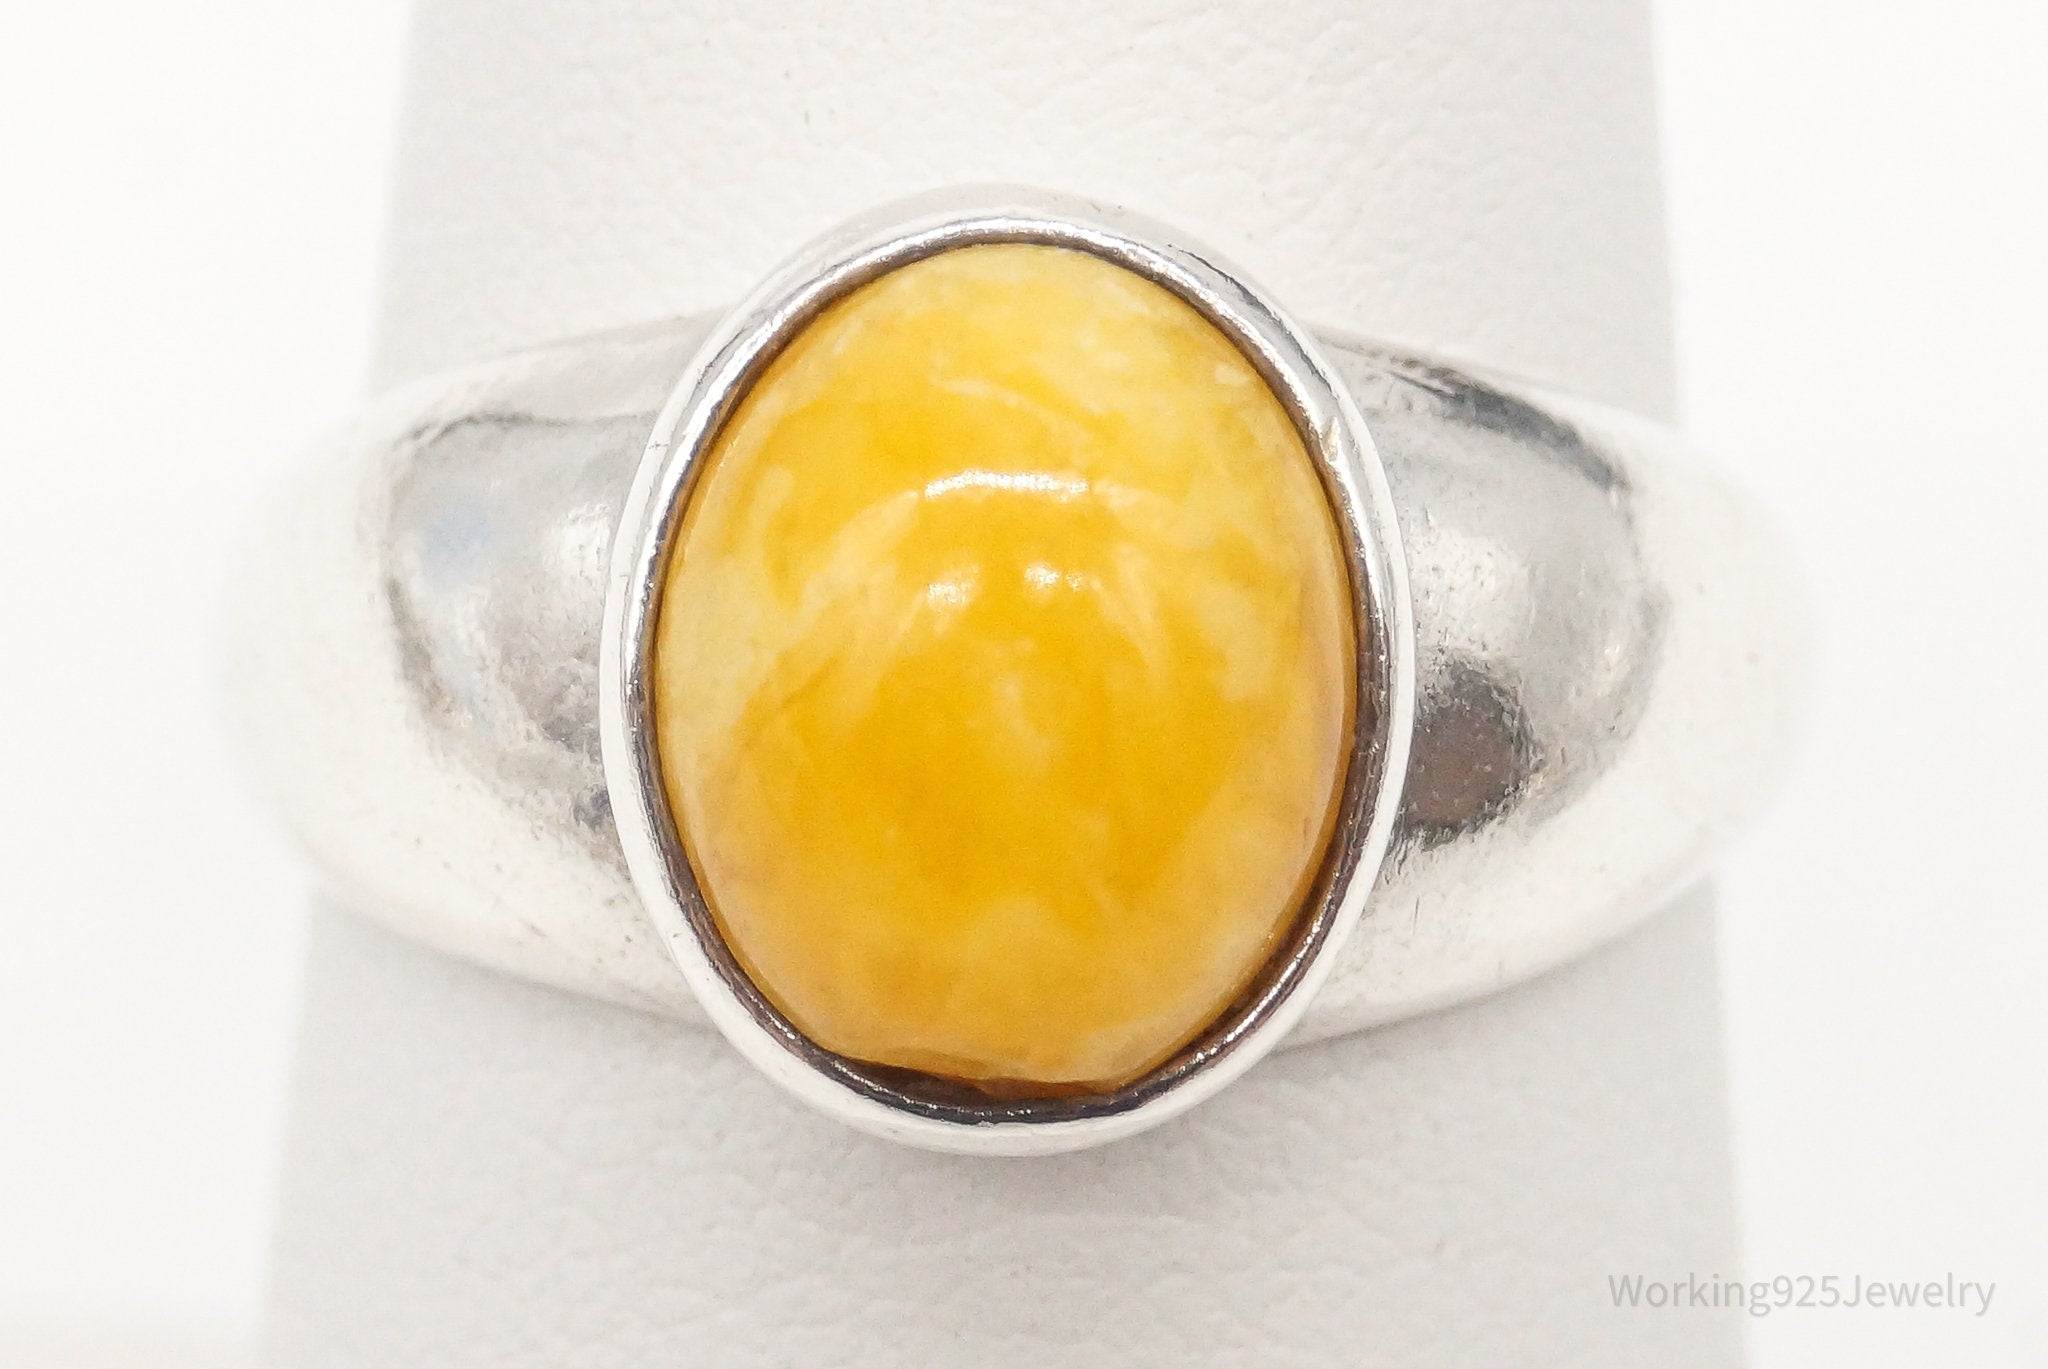 Vintage Yellow Amber Sterling Silver Ring - Size 6.5